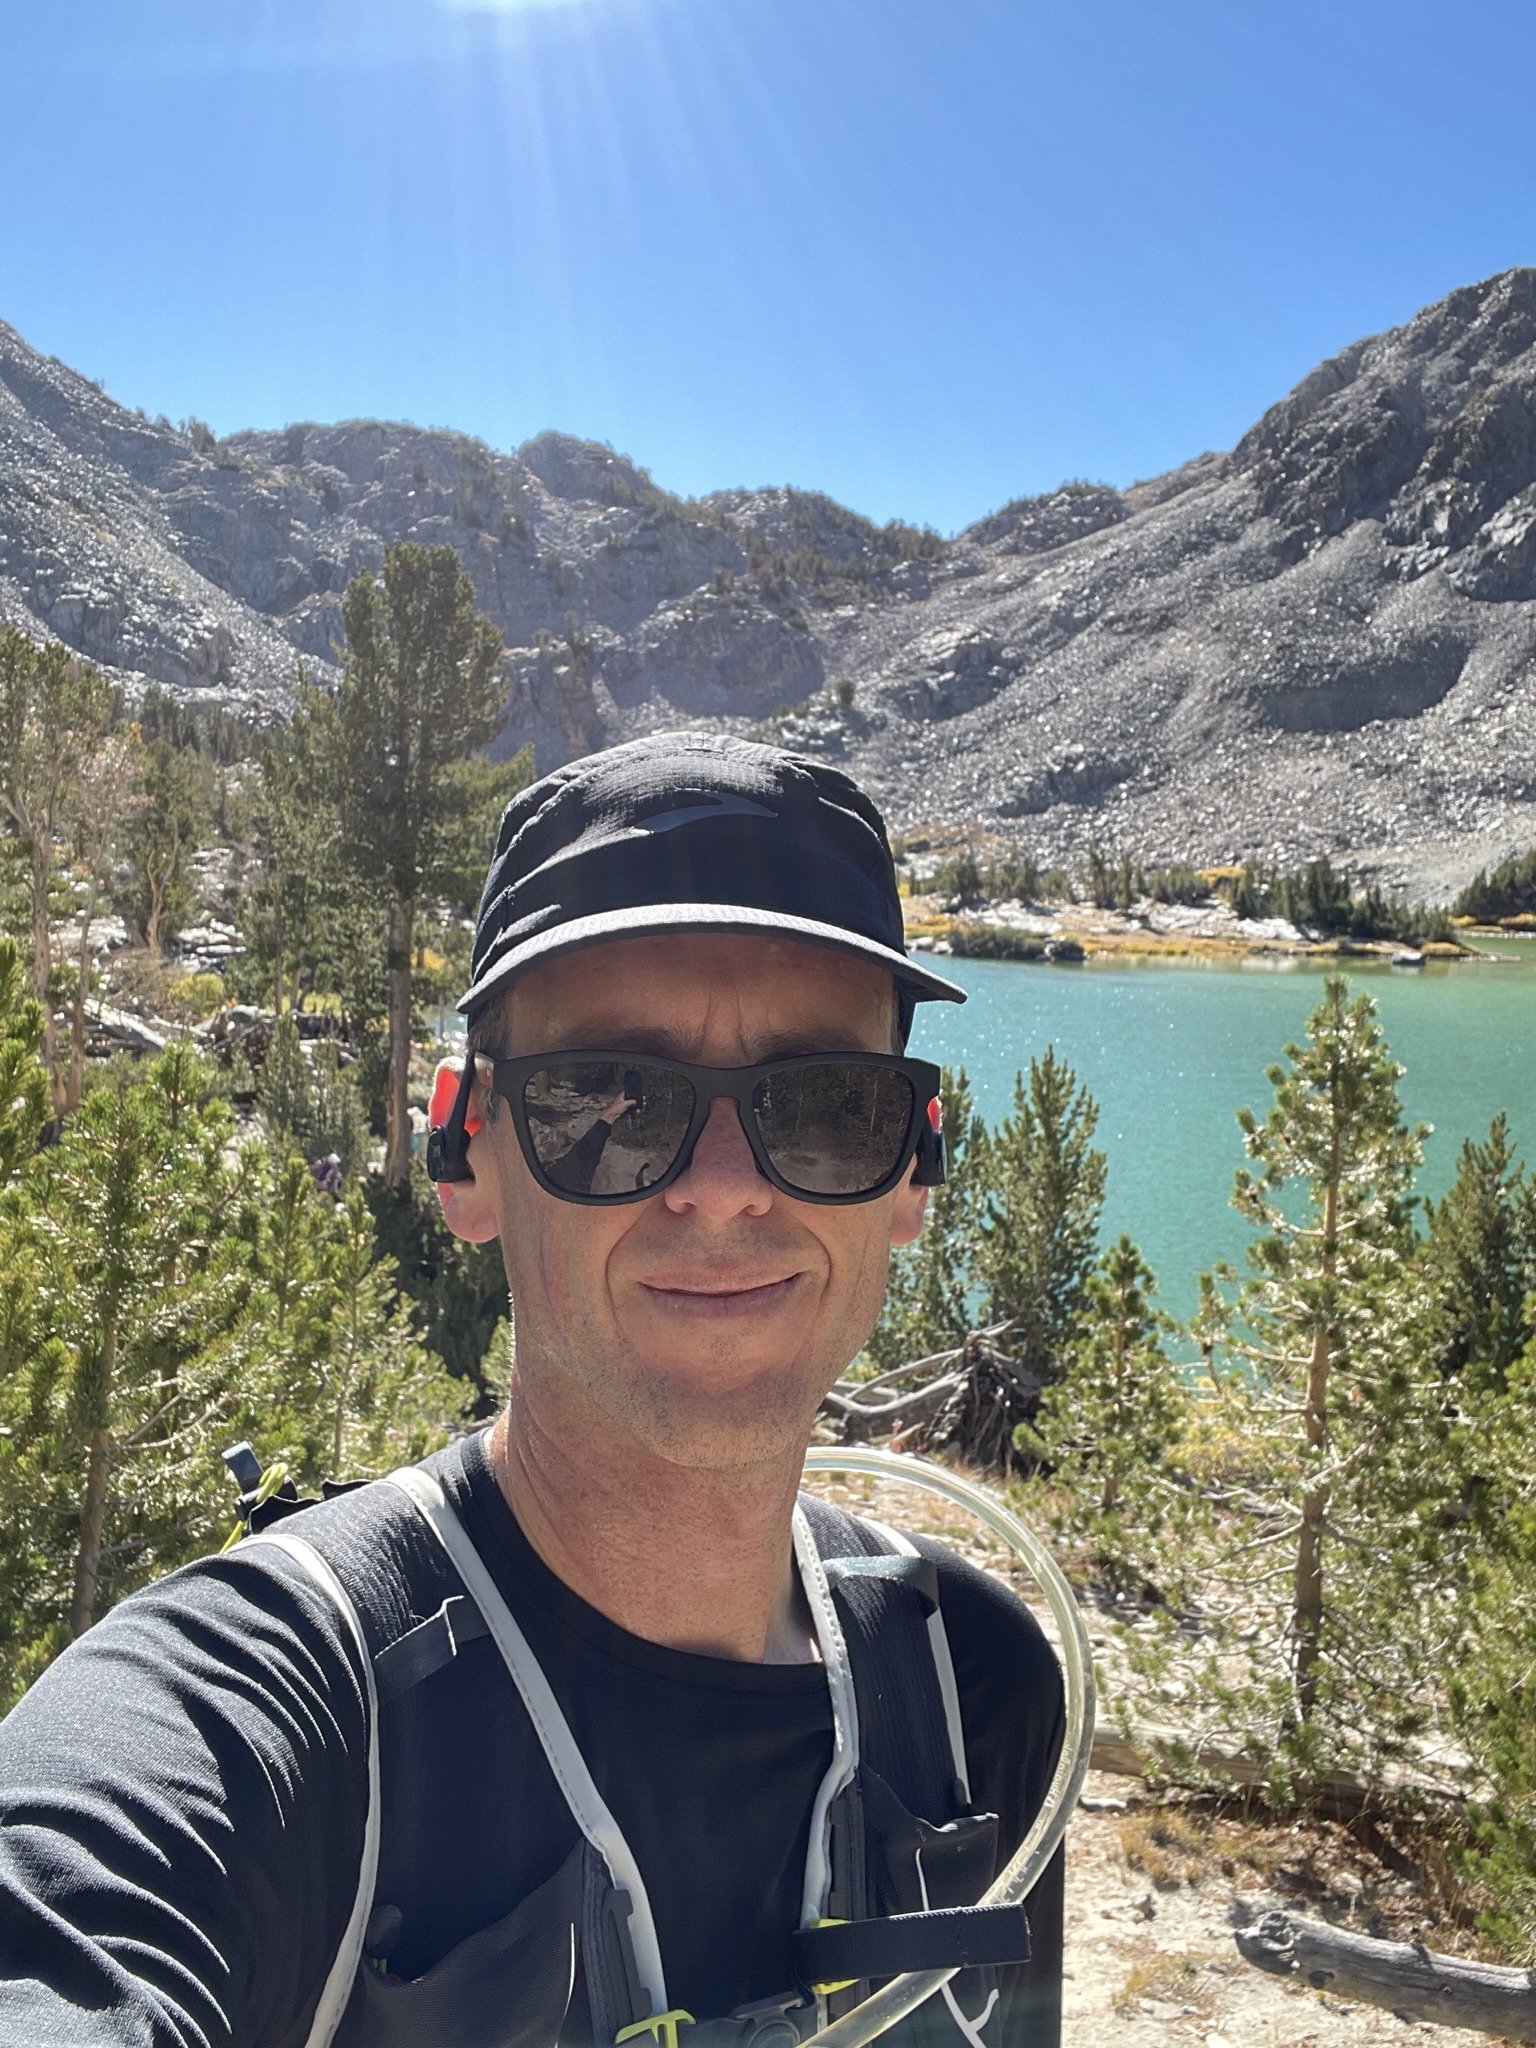   Name:  Ryan   Hometown:  Long Beach, CA, USA   Which Runcation did you attend:  Yosemite + Mammoth Lakes   What is your profession:  Property Management   How long have you been running?:  20 years.   Did you have experience running trails before t